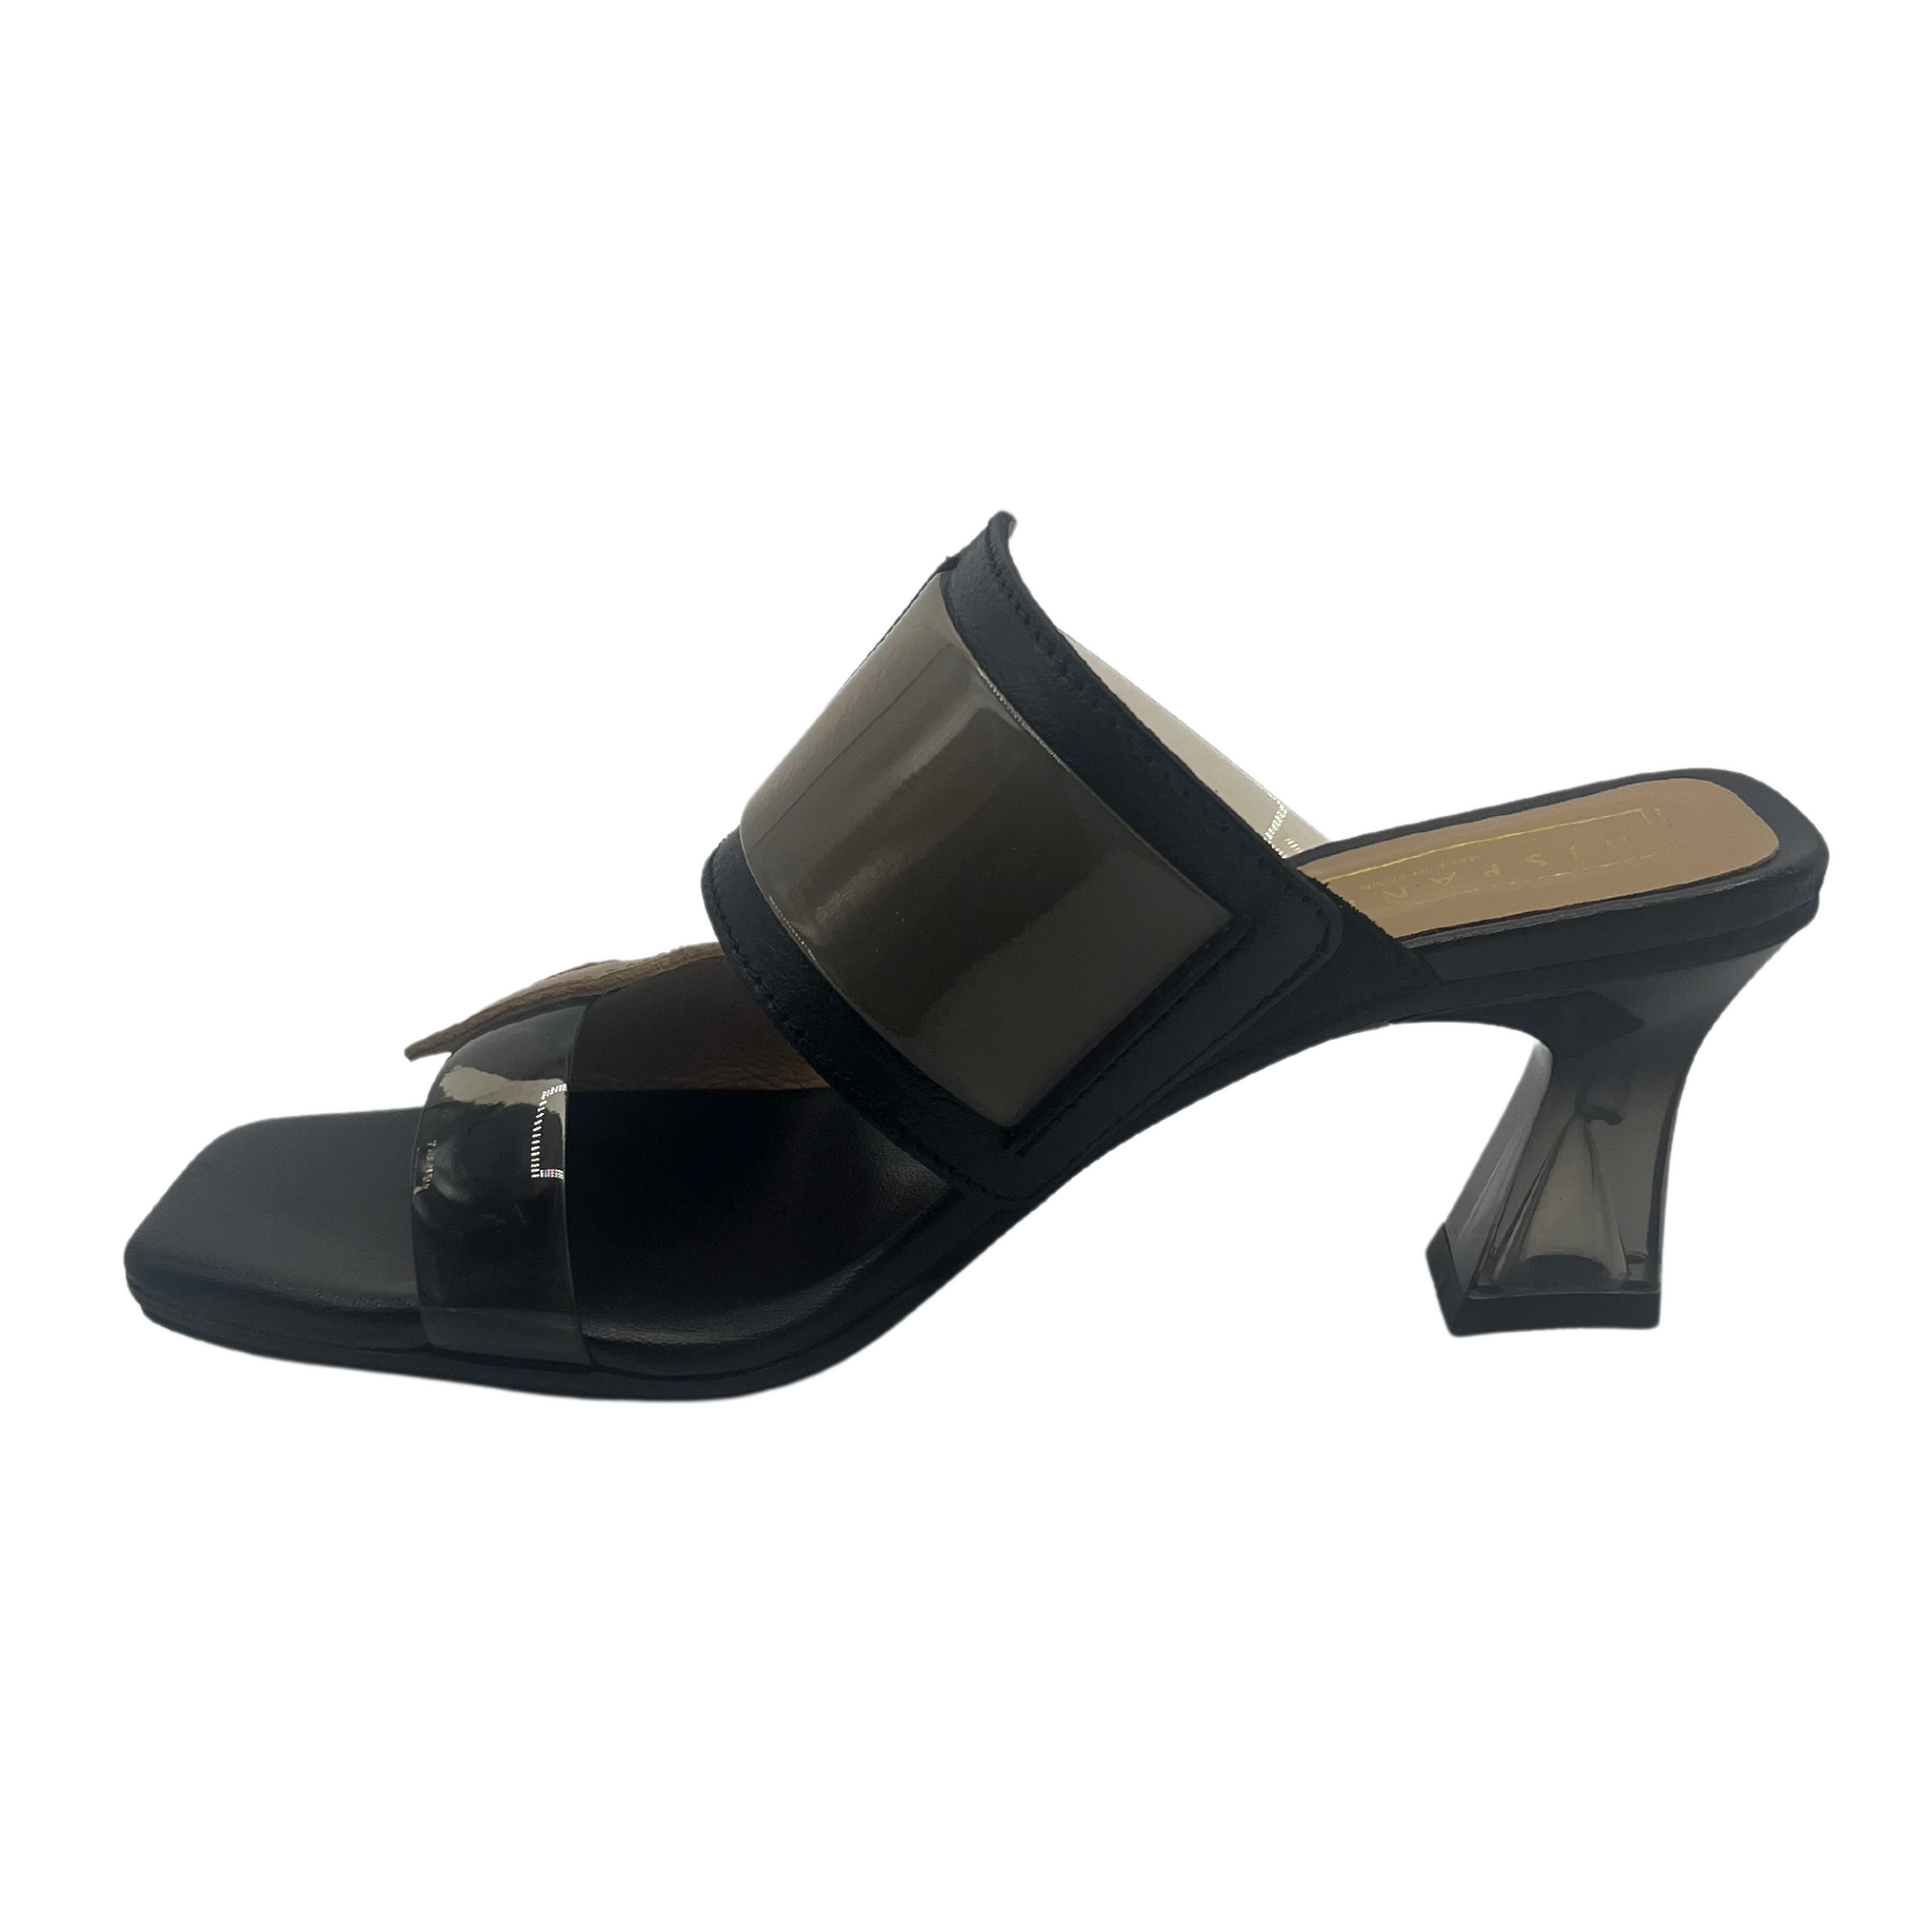 Left facing view of leather and vinyl shoe with square toe and flared lucite heel